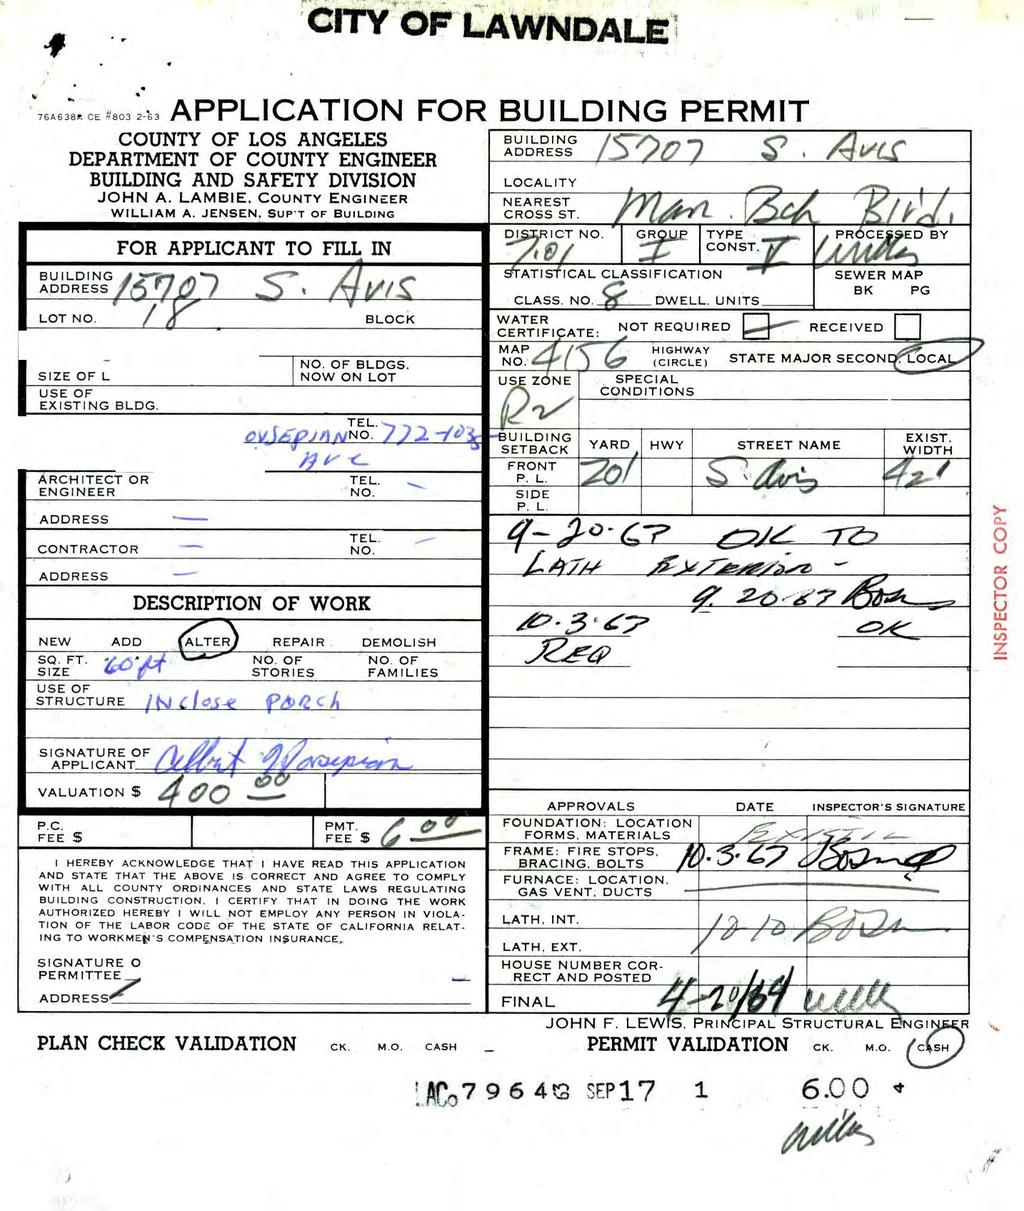 CITY OF LAWNDALE APPLICATION FOR BUILDING PERMIT S. Aiy(S COUNTY OF LOS ANGELES DEPARTMENT OF COUNTY ENGINEER BUILDING AND SAFETY DIVISION JOHN A. LAMBIE.